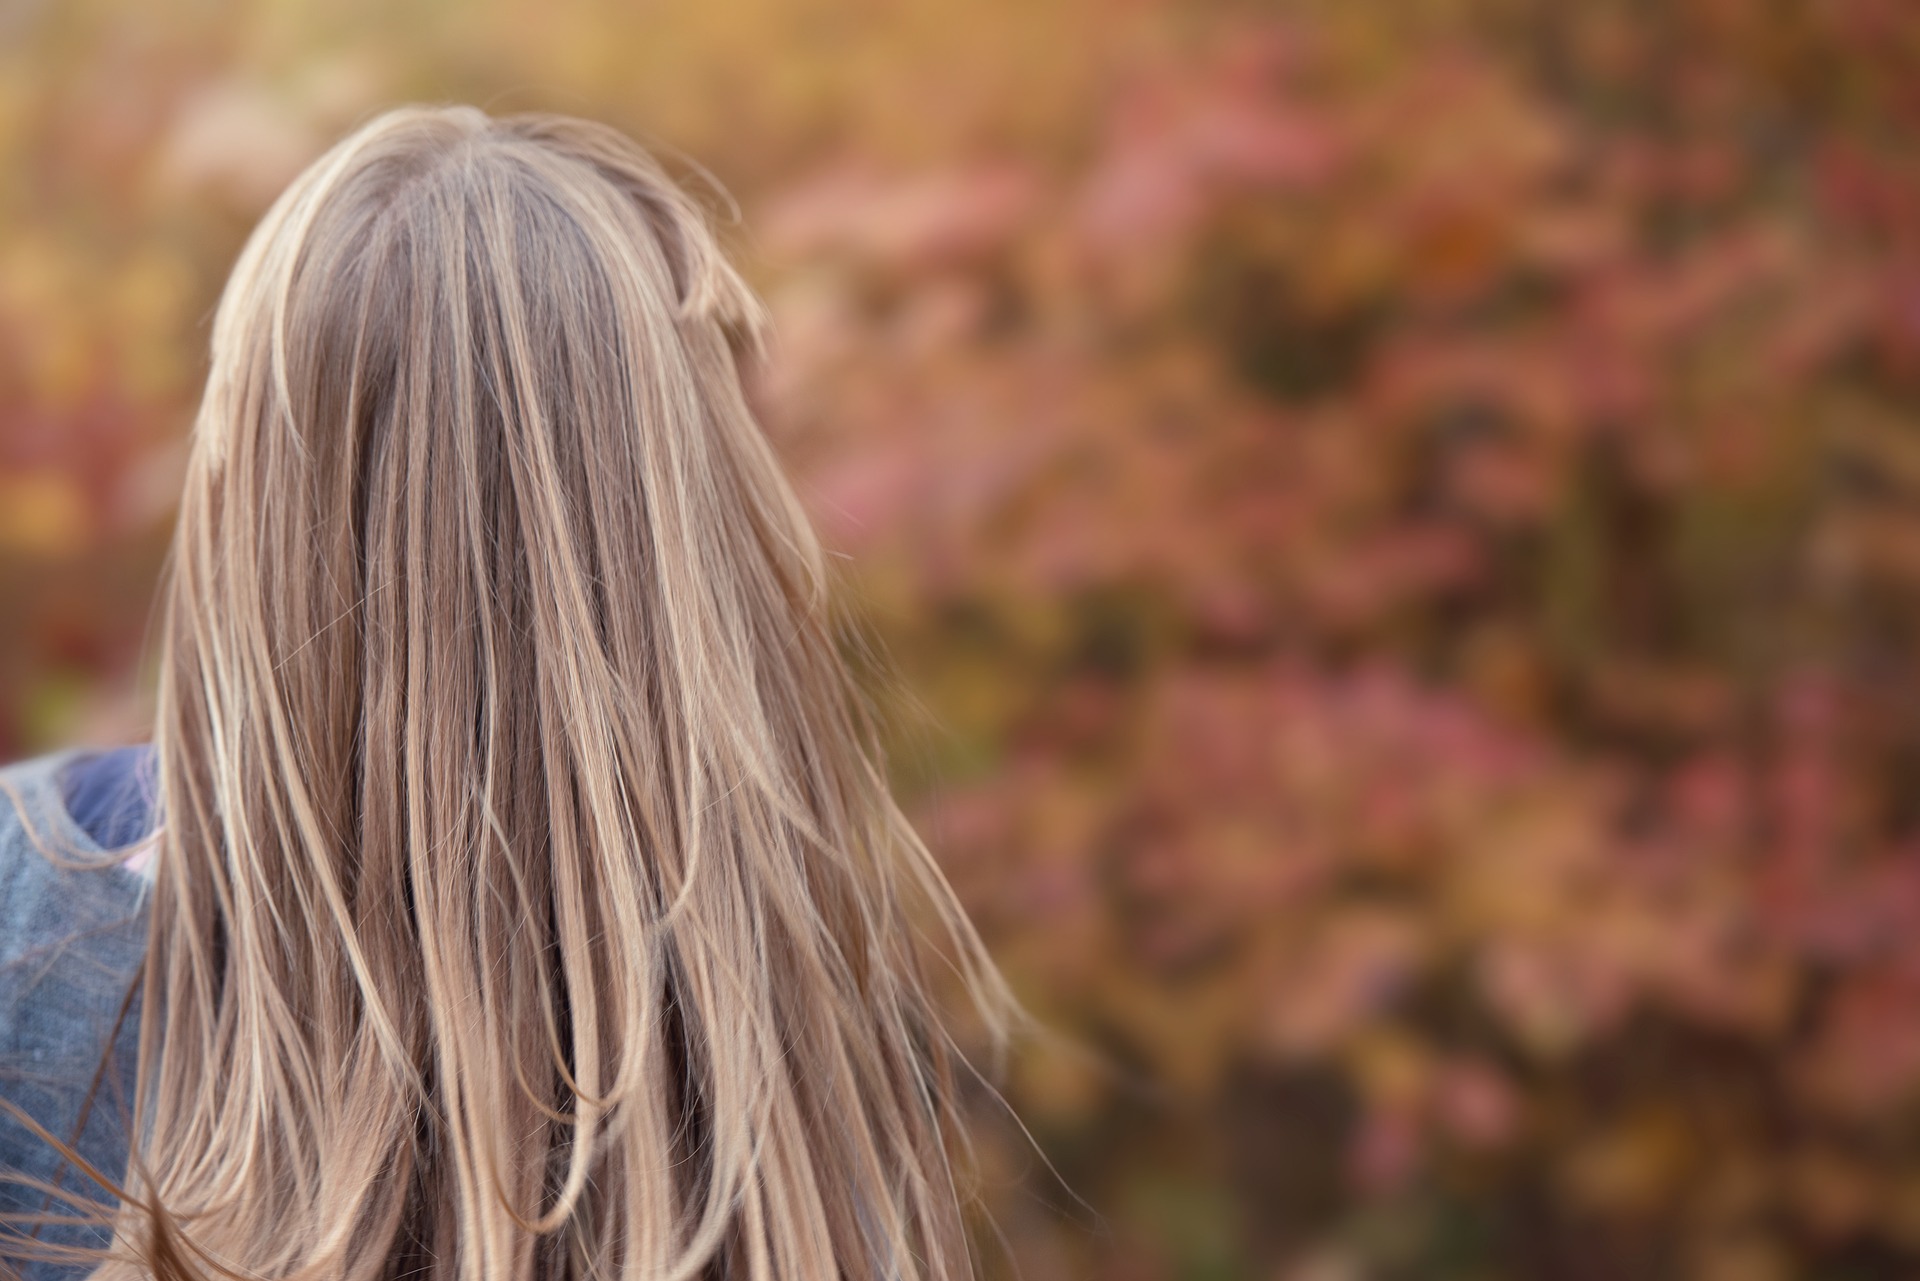 From behind, a woman has long, blonde healthy hair that appears to have moved in the breeze. The background is out of focus and appears to show trees in autumn.